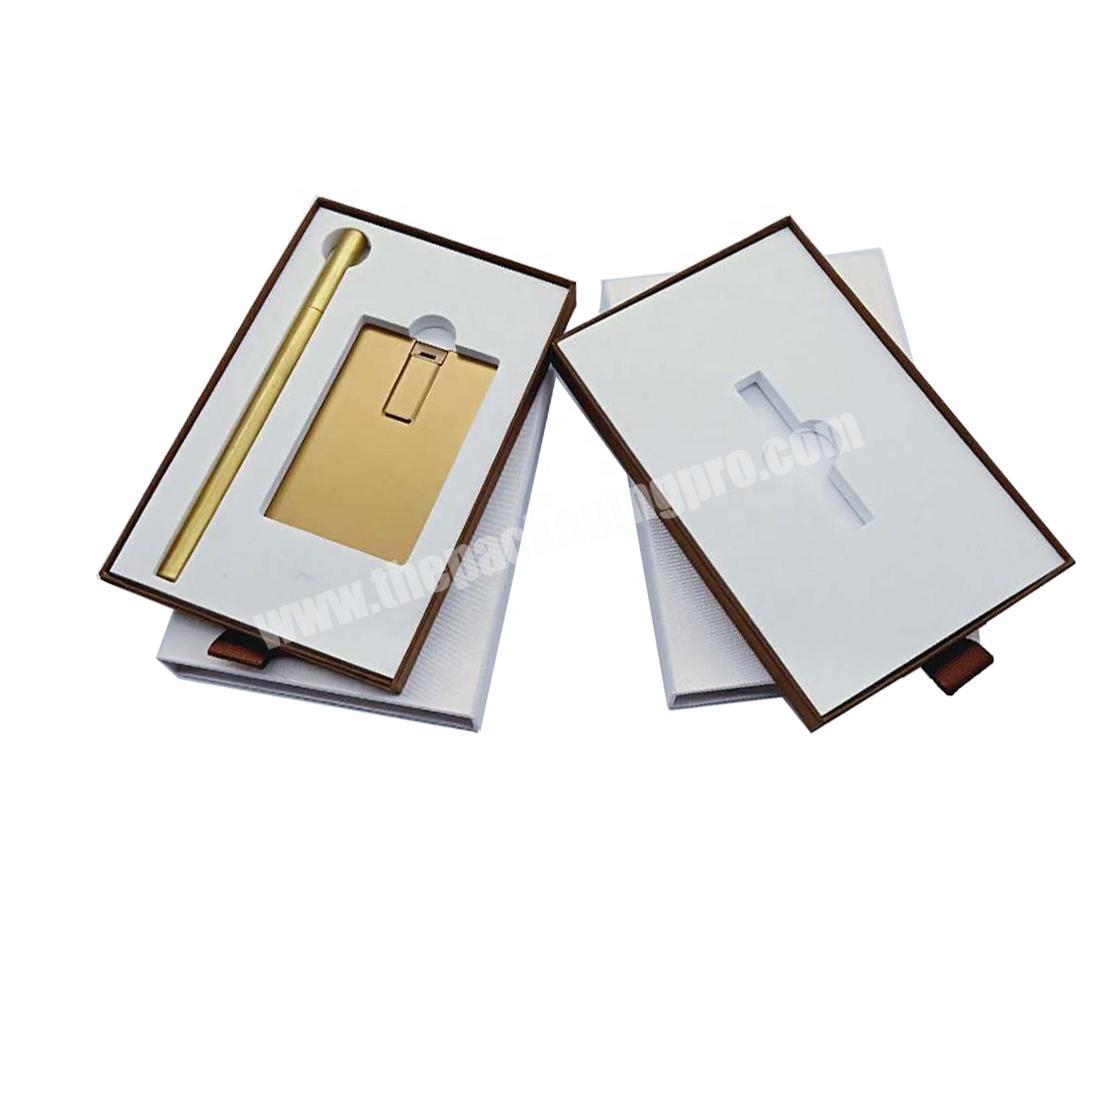 High quality electronic blank cigarette gift box pen with boxes for pens